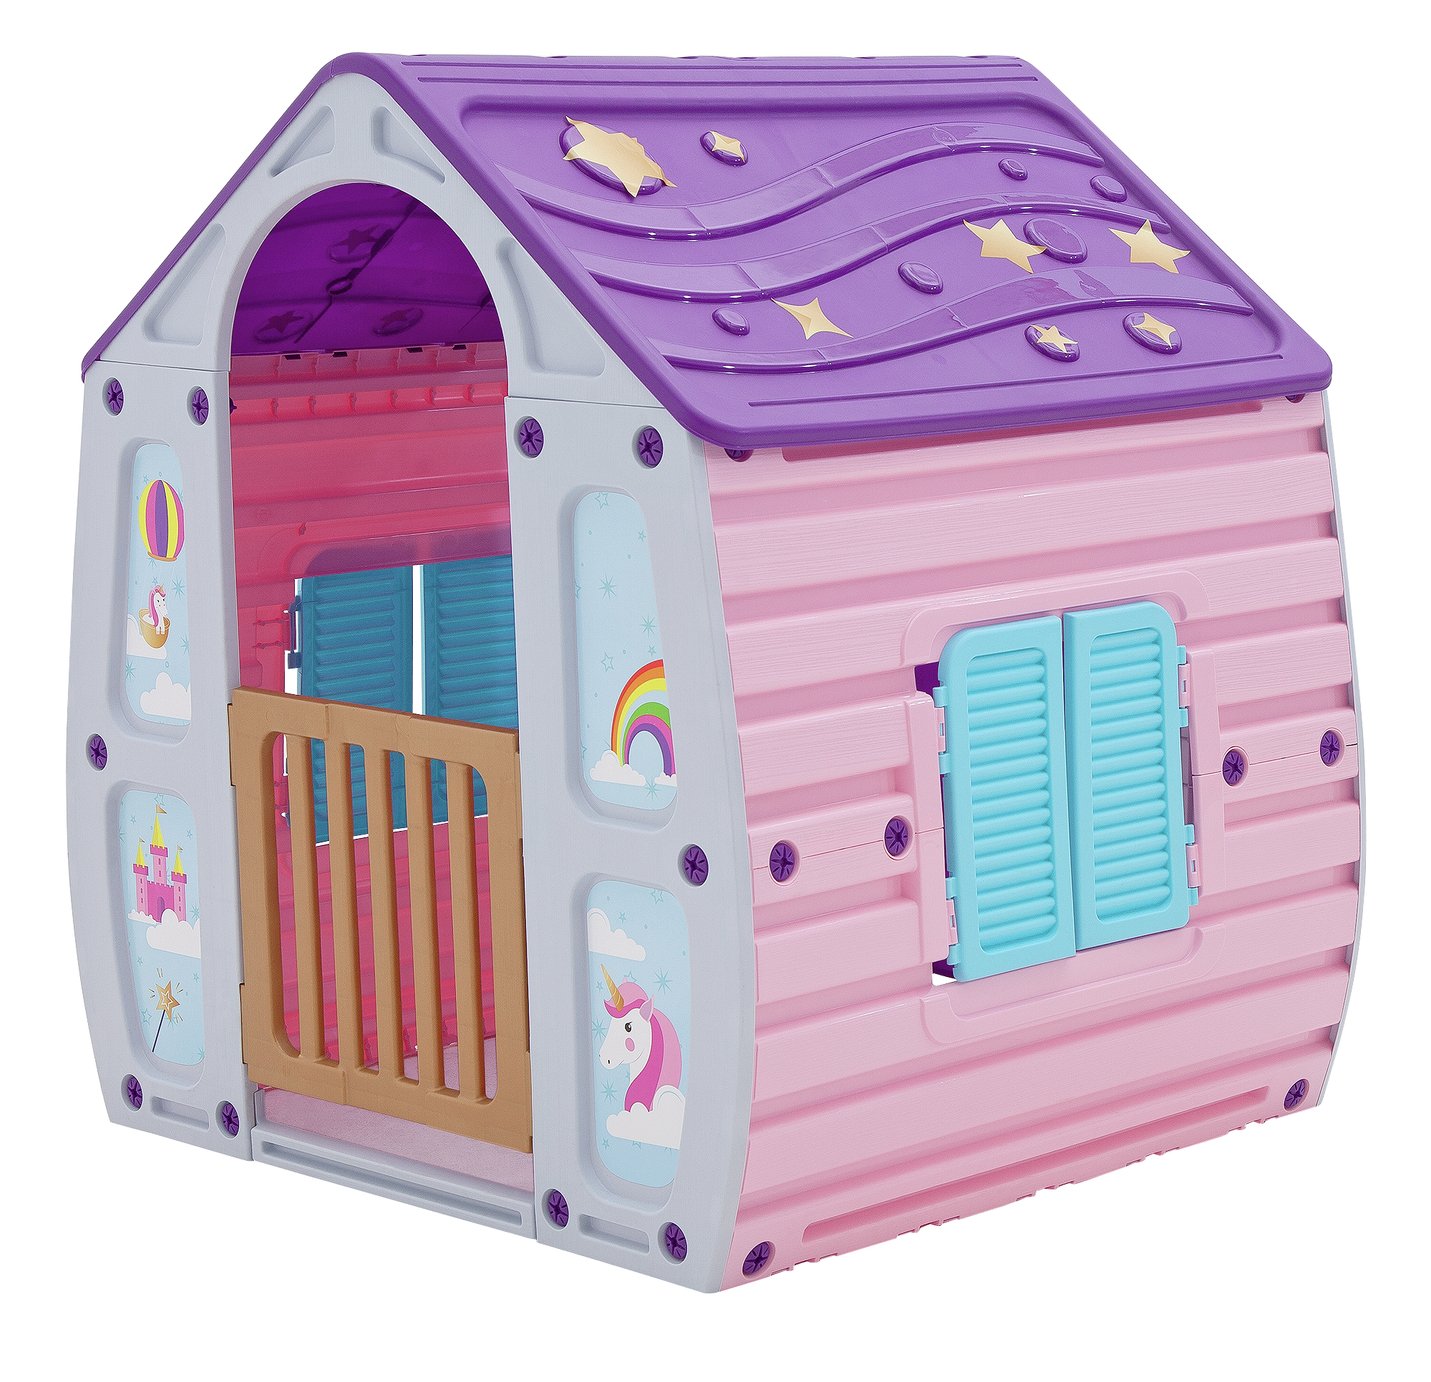 Chad Valley Magic Unicorn Playhouse Review